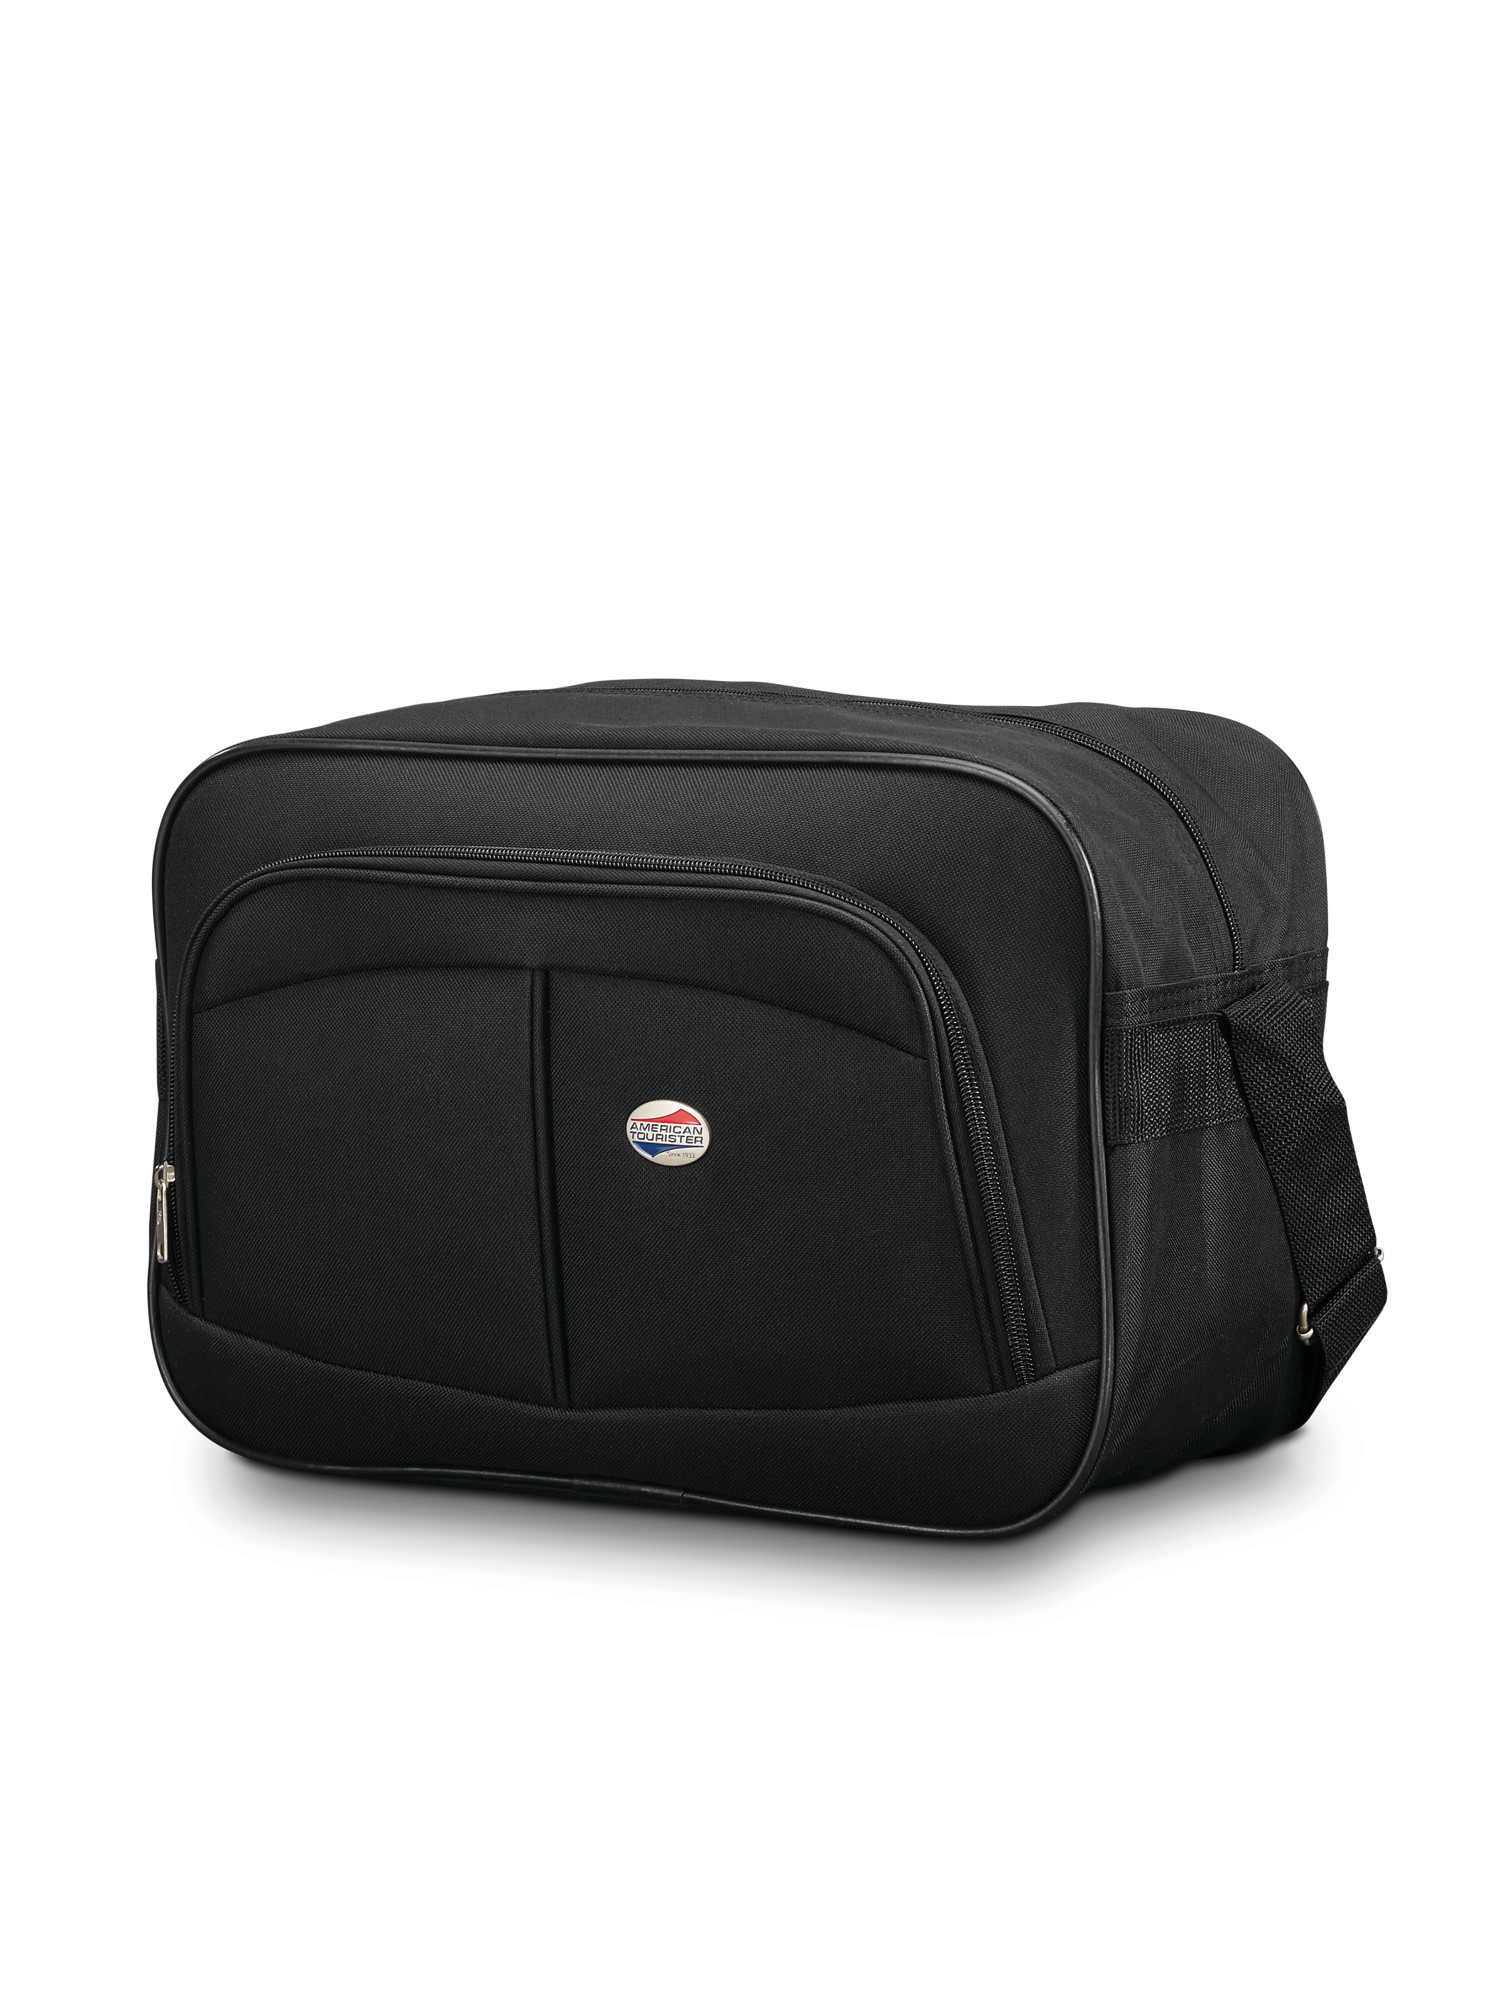 American Tourister Brewster 3 Piece Softside Luggage Set - image 6 of 9